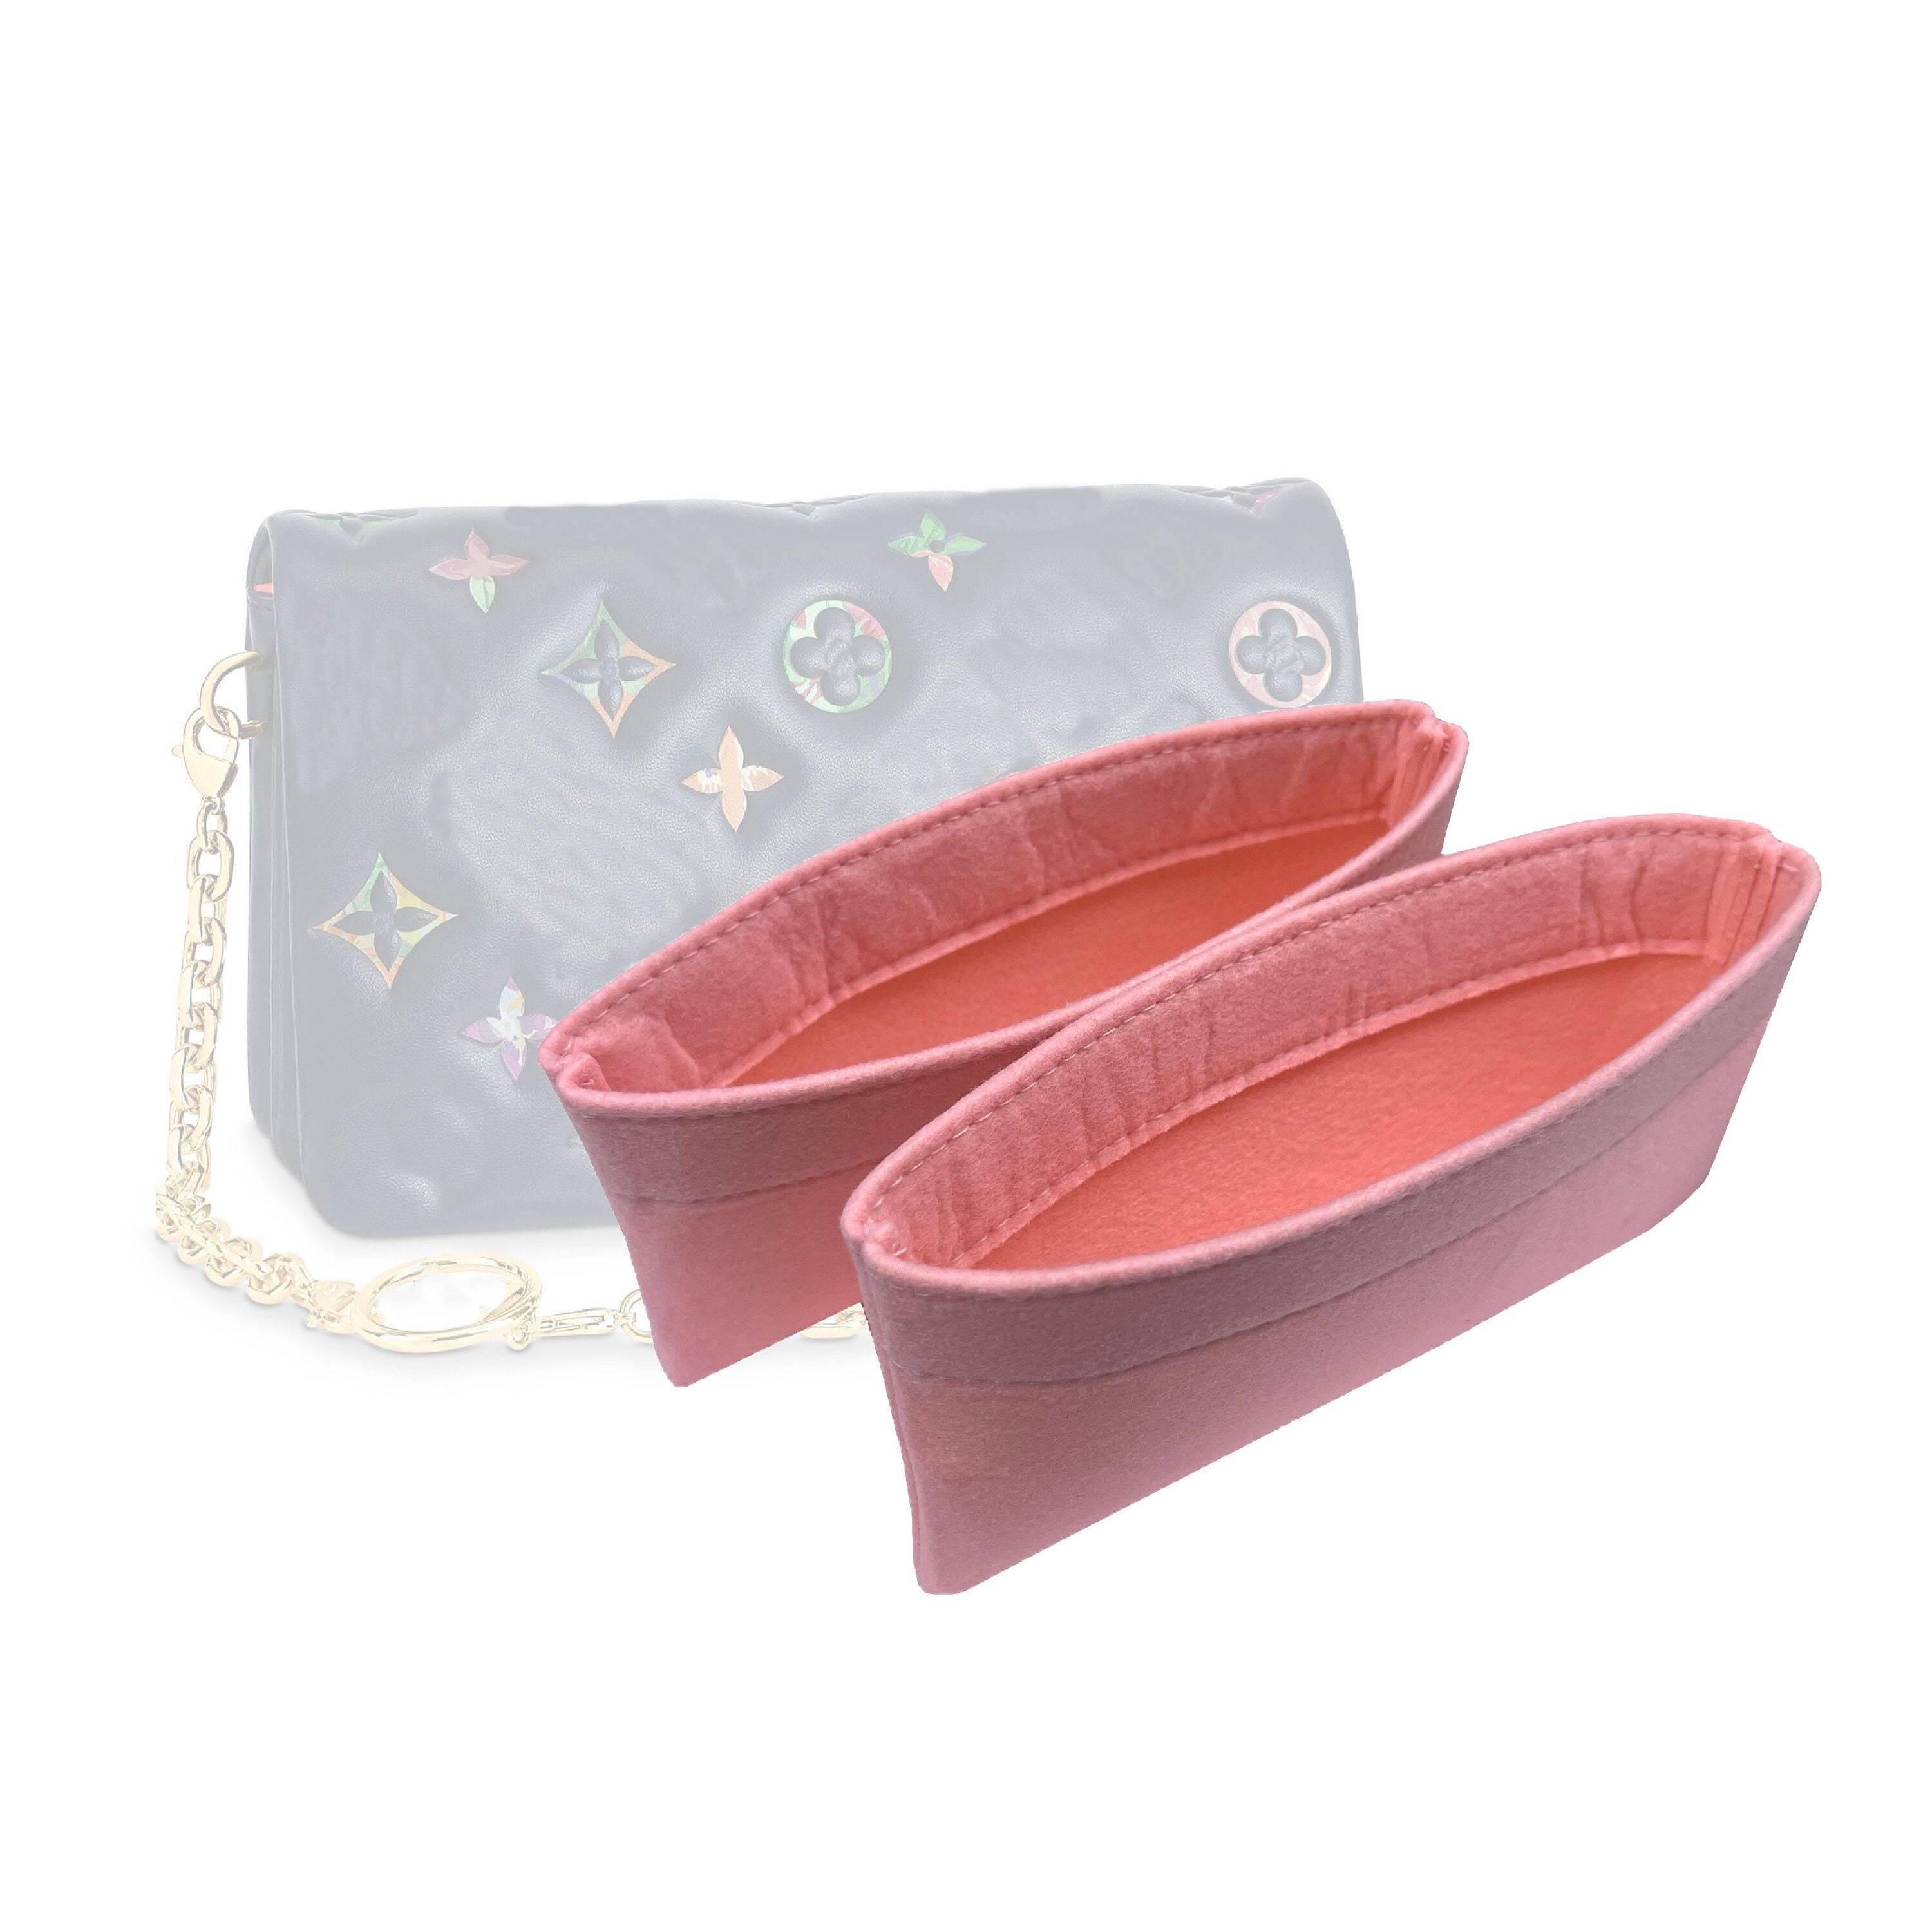 Get Florally With Louis Vuitton's LV Garden Coussin Bags